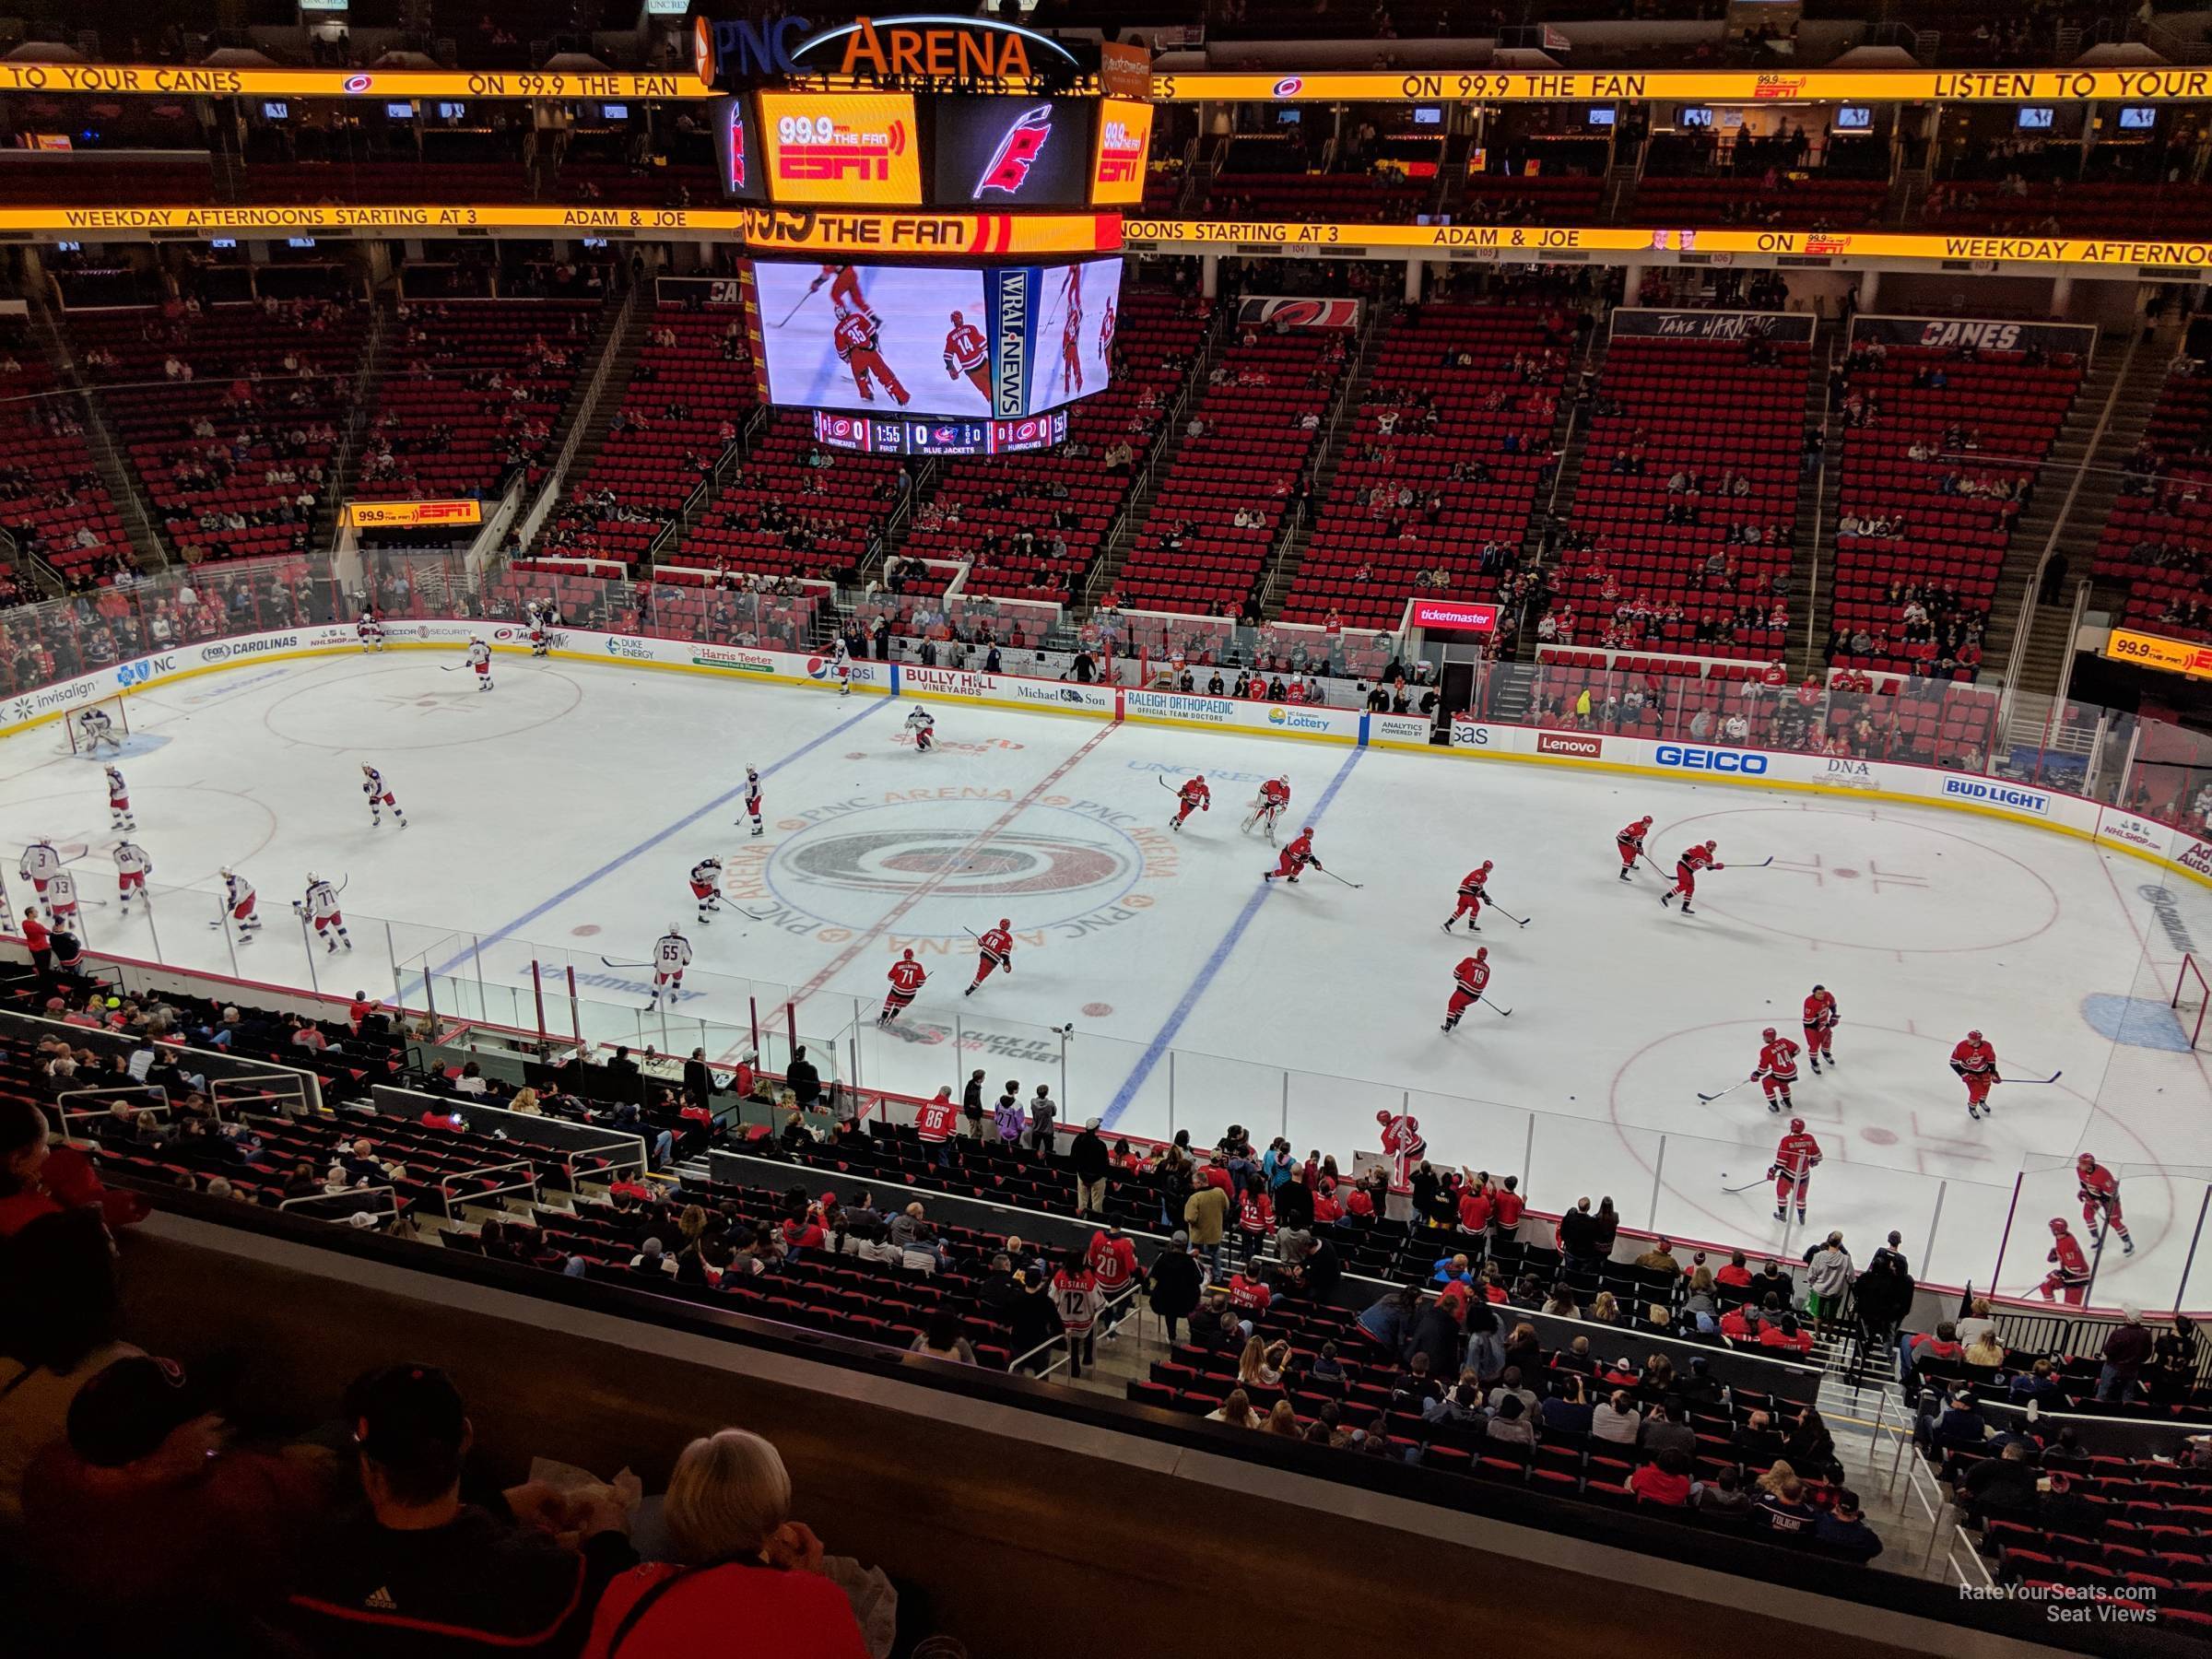 section 218, row t seat view  for hockey - pnc arena